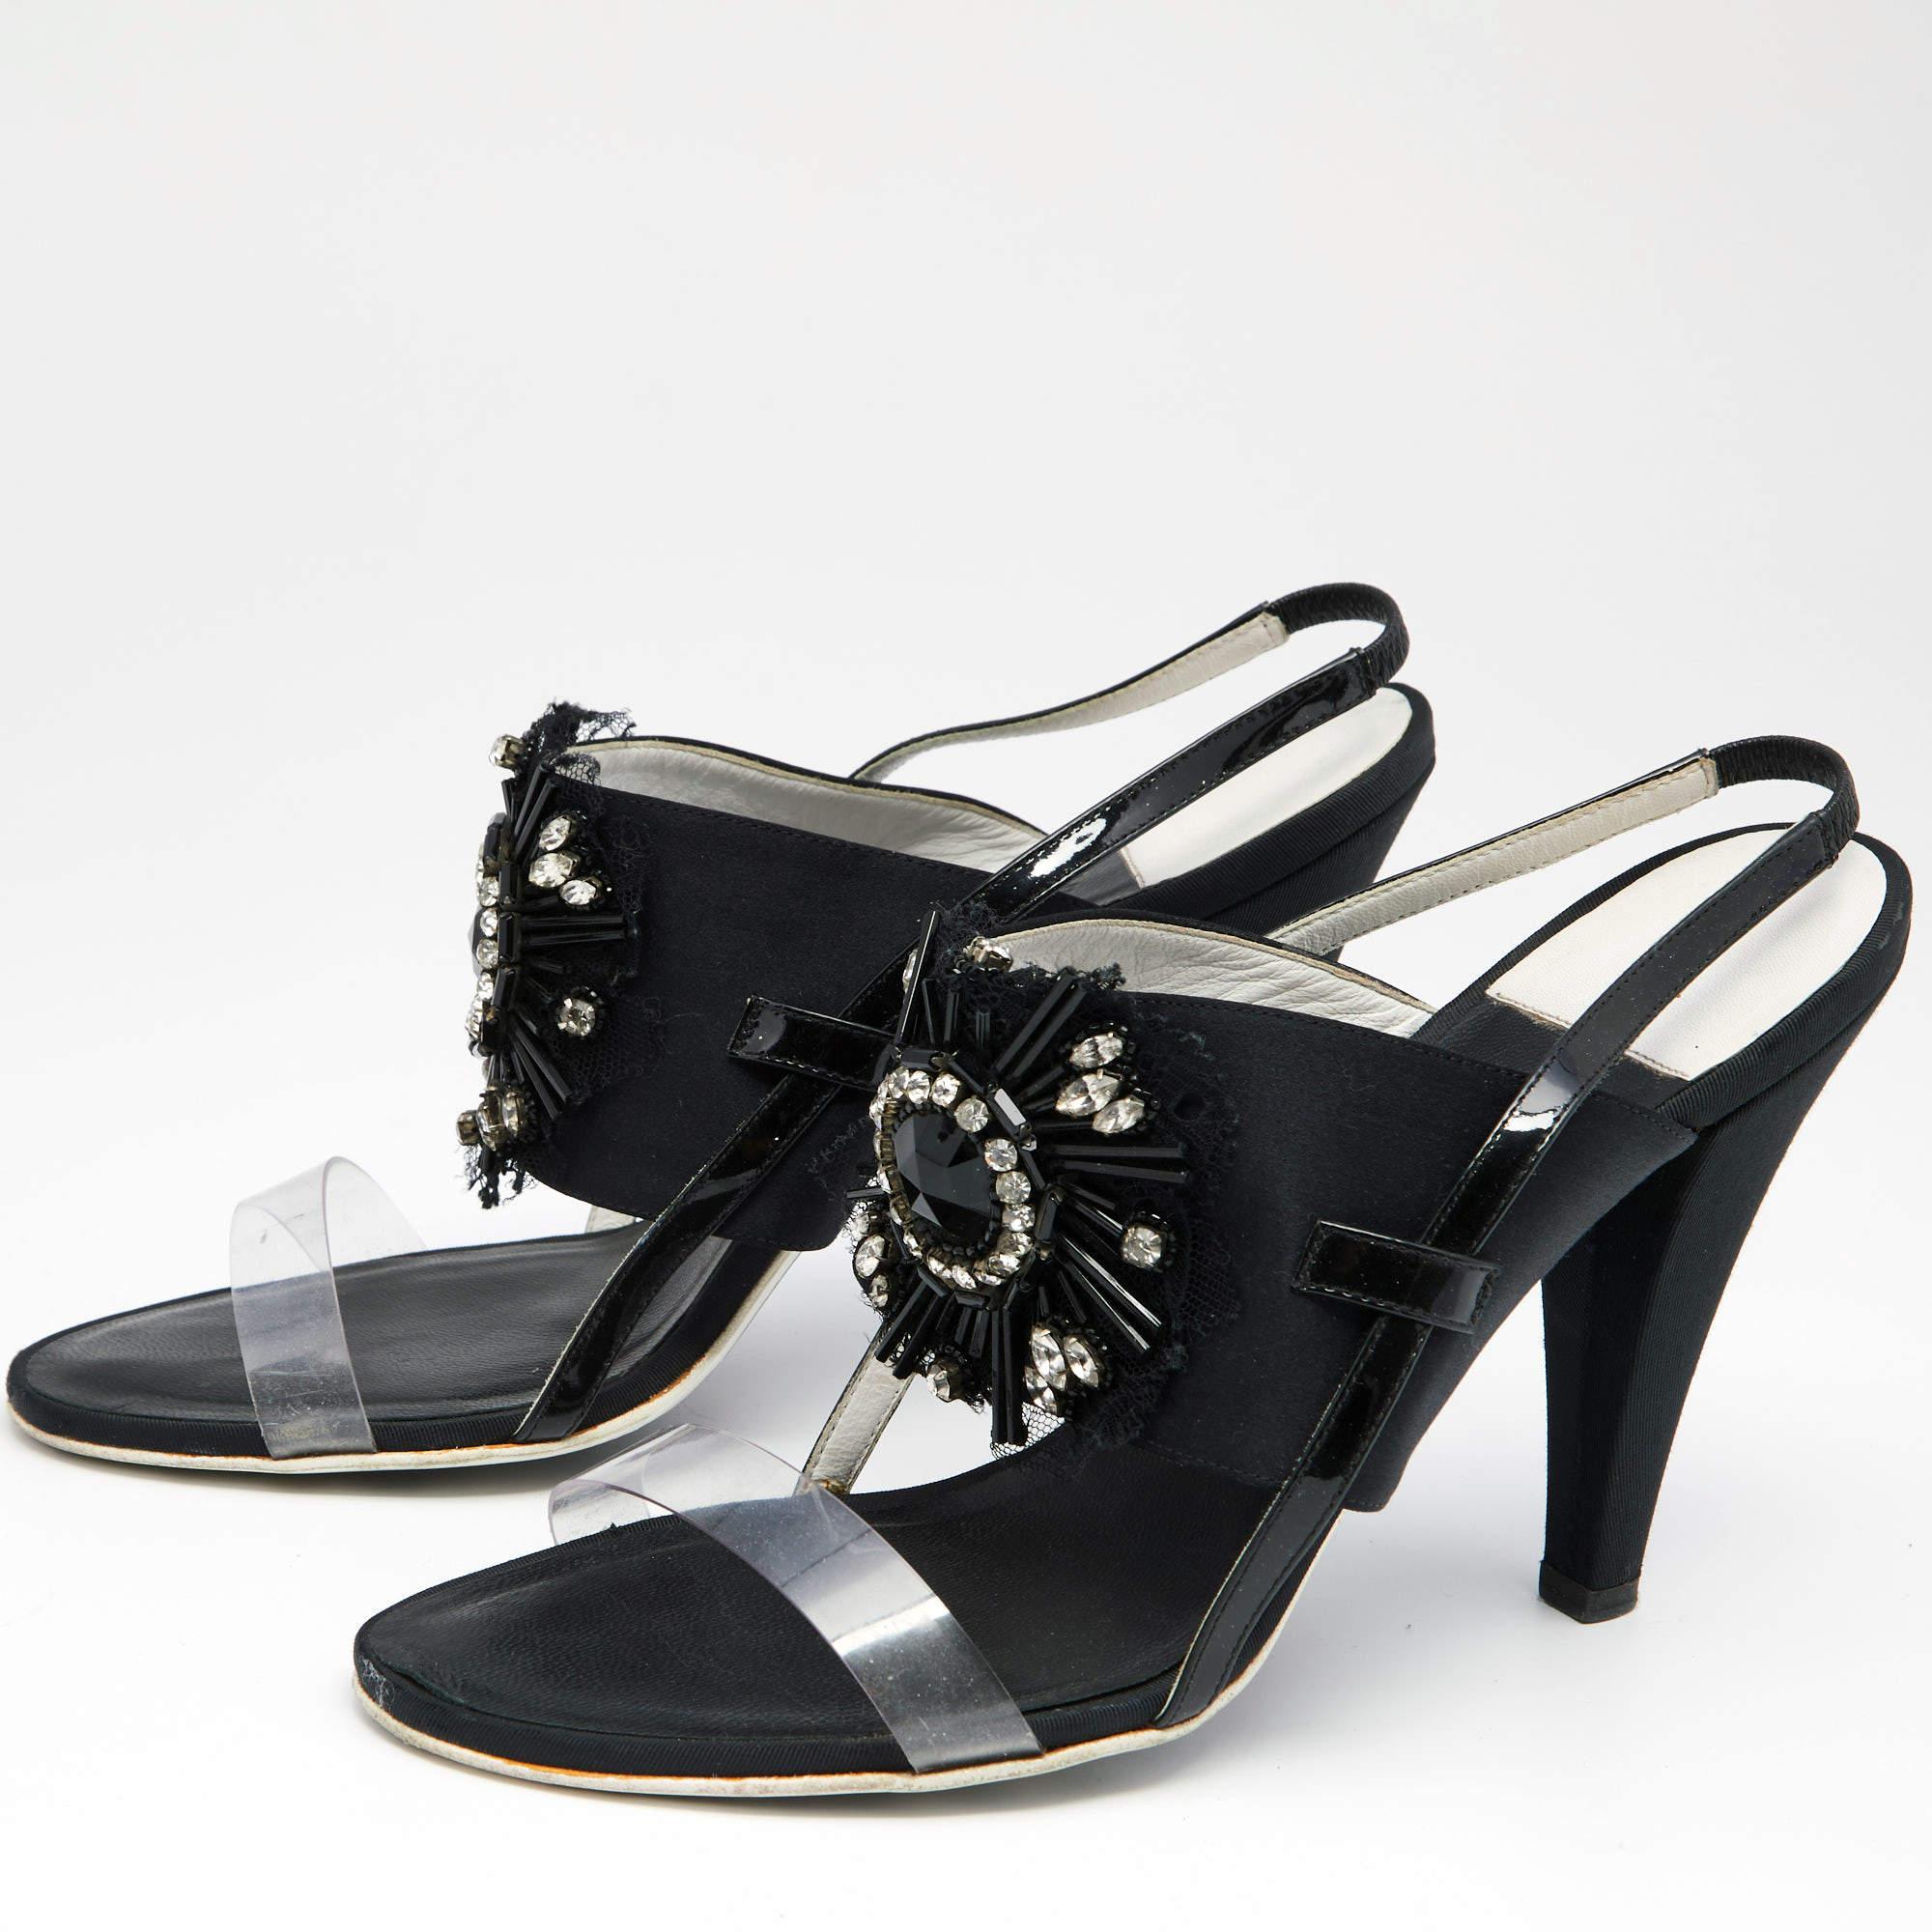 Chanel Black Satin And PVC Embellished Slingback Sandals Size 40 In Good Condition For Sale In Dubai, Al Qouz 2